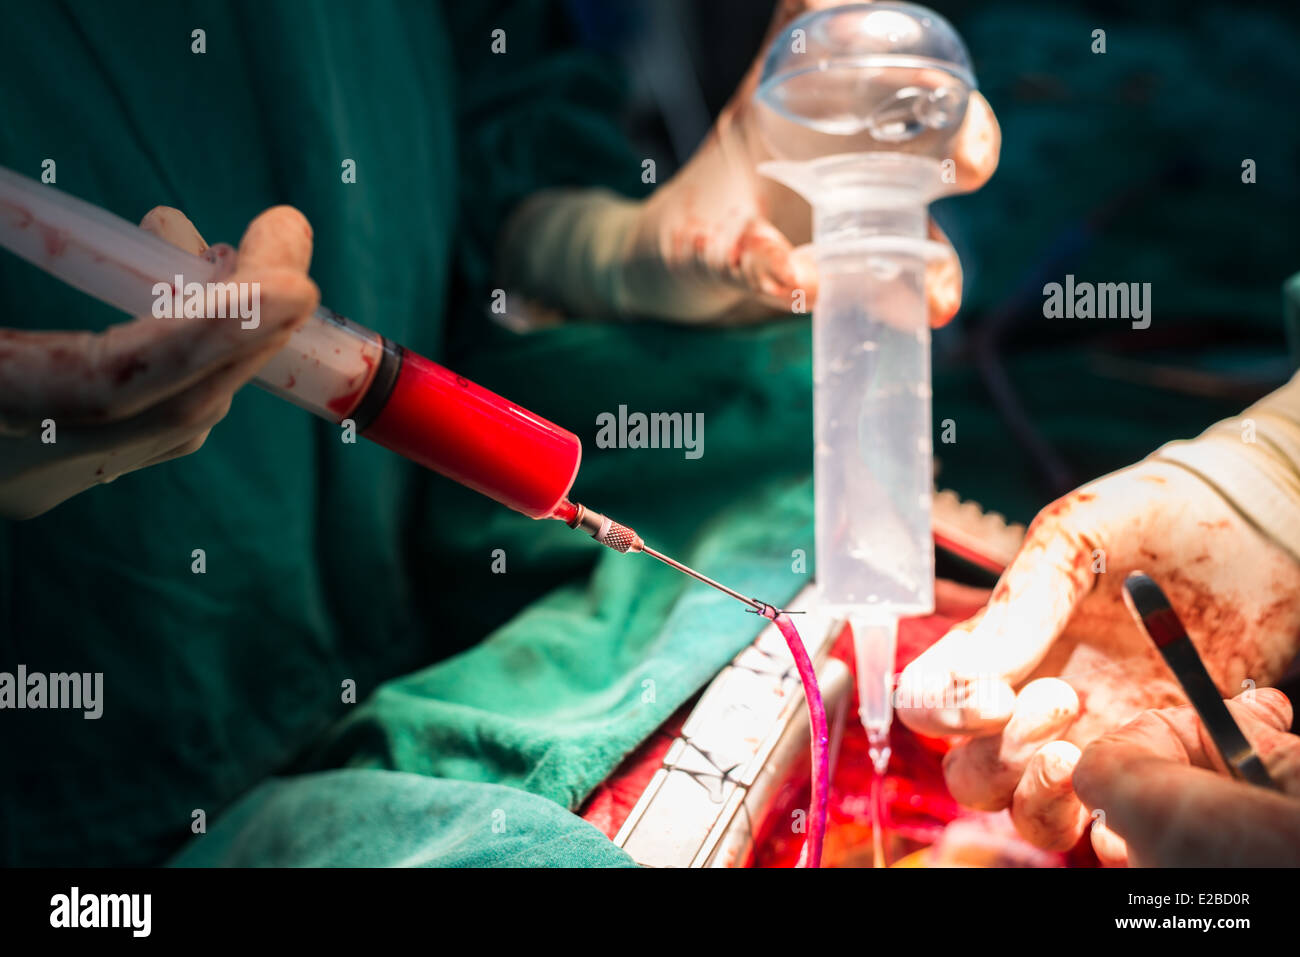 Check anastomosis by injected blood cardioplegia Stock Photo